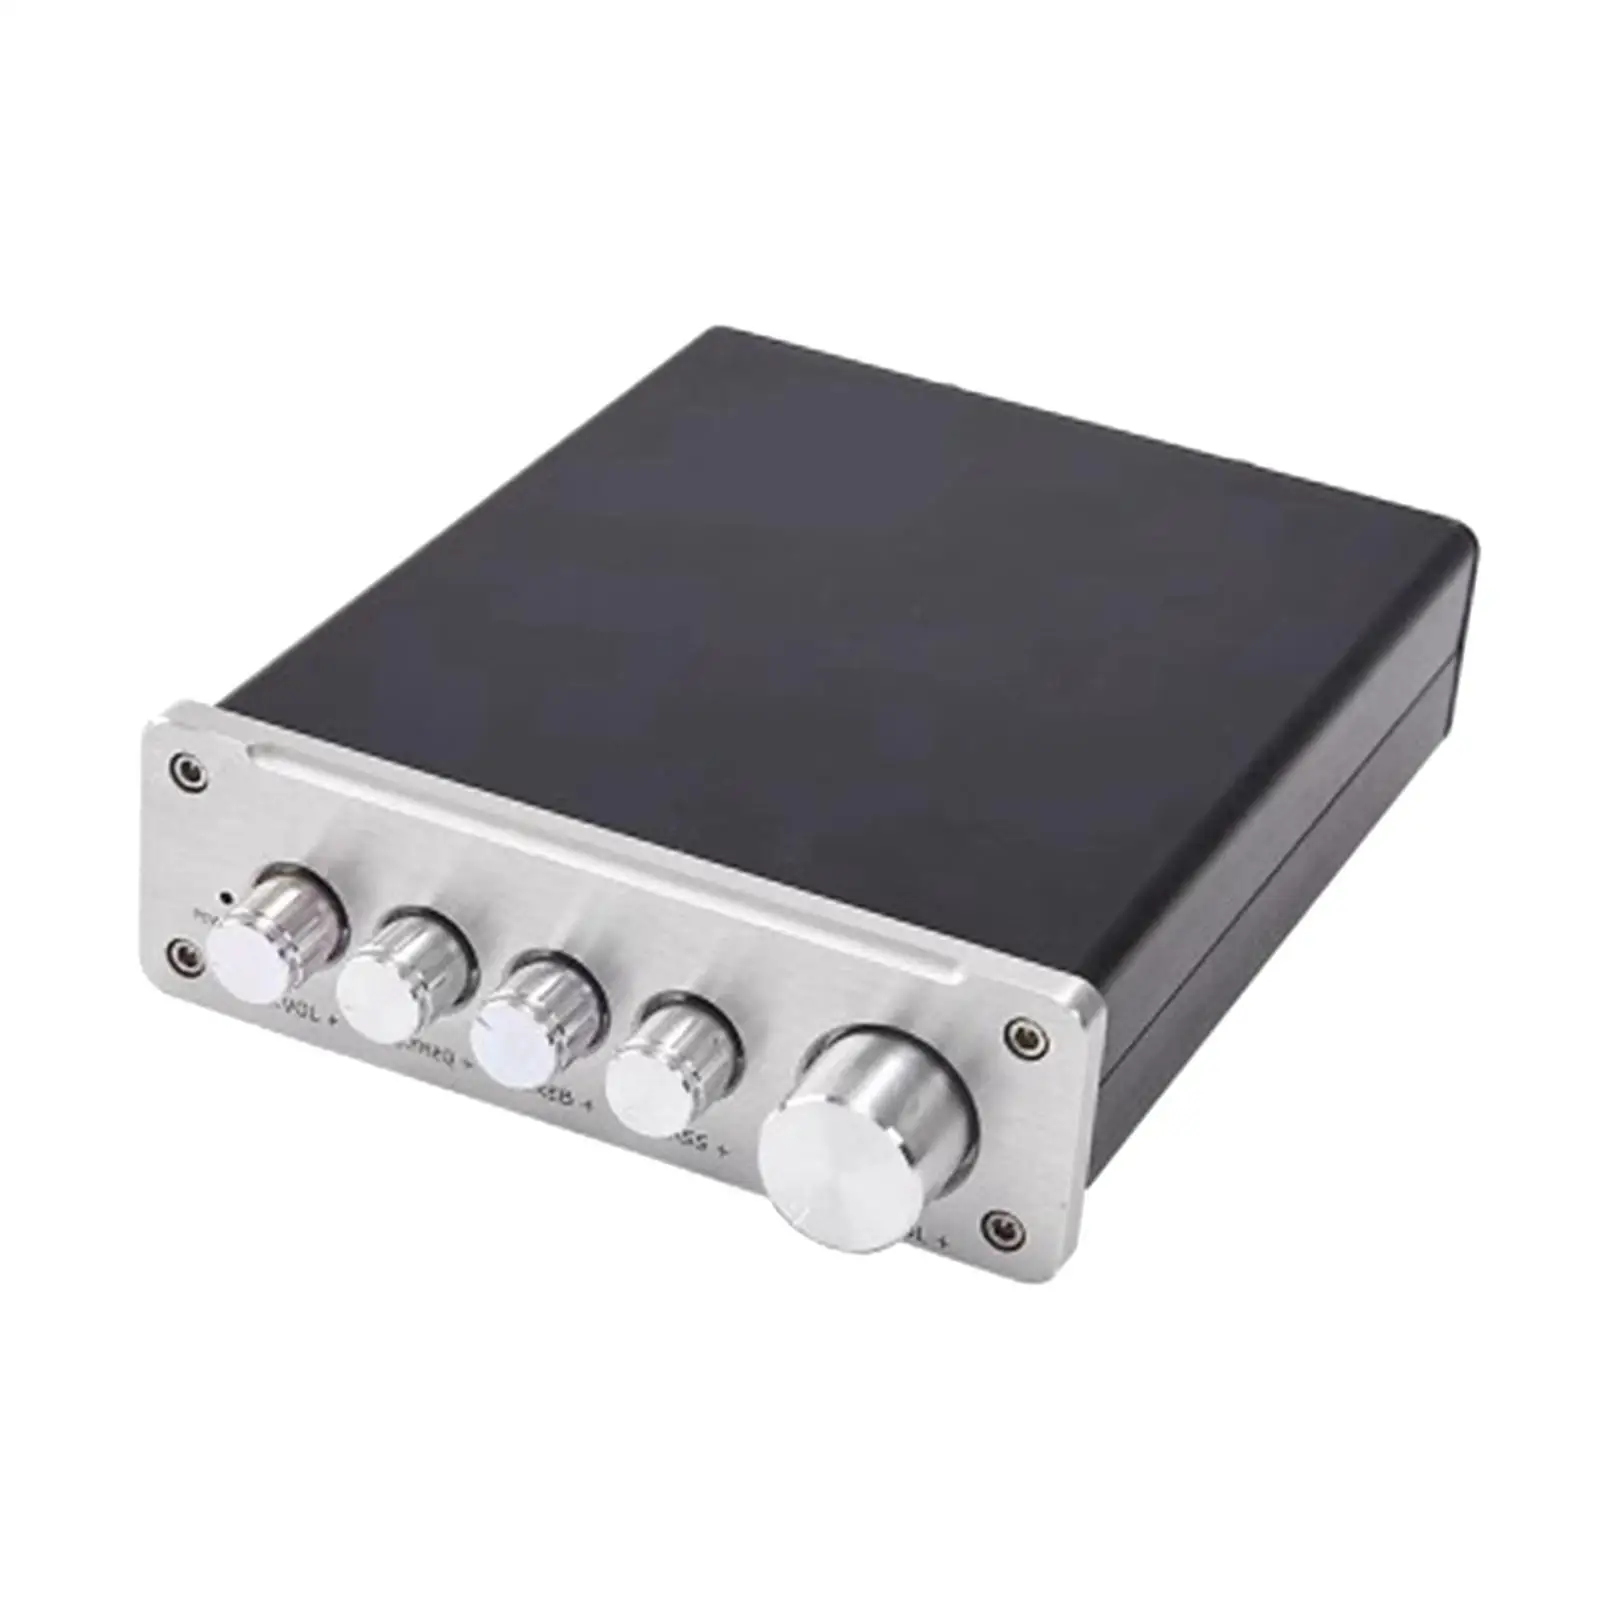 Stereo Audio Amplifier D3 5.0 2.1CH Professional Digital MP3 Player for Outdoor Performances Wedding Activities KTV Home Theater